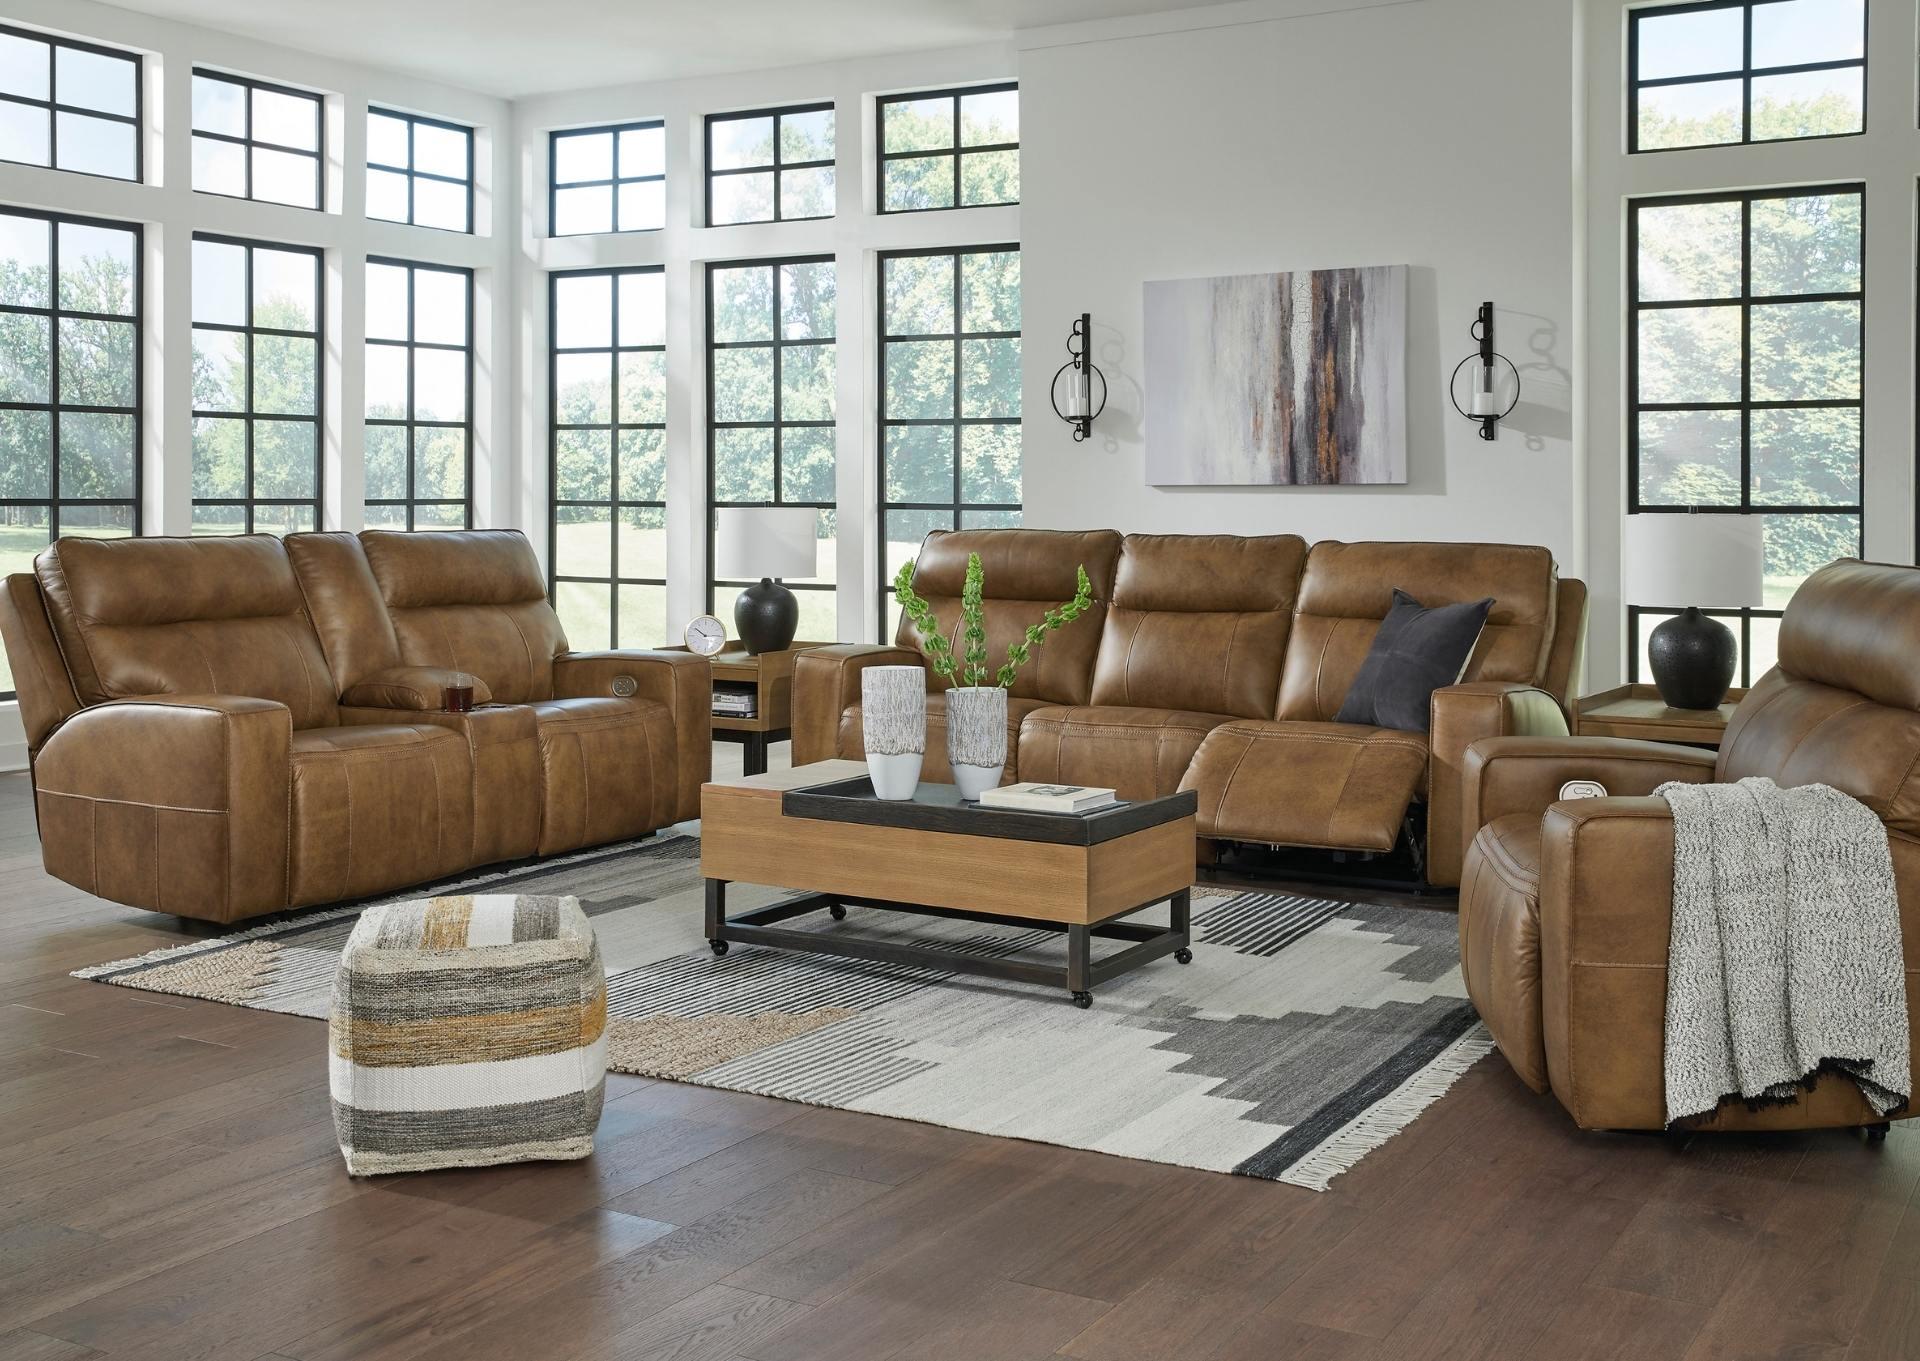 GAME PLAN CARAMEL LEATHER 2P POWER LOVESEAT WITH CONSOLE,ASHLEY FURNITURE INC.